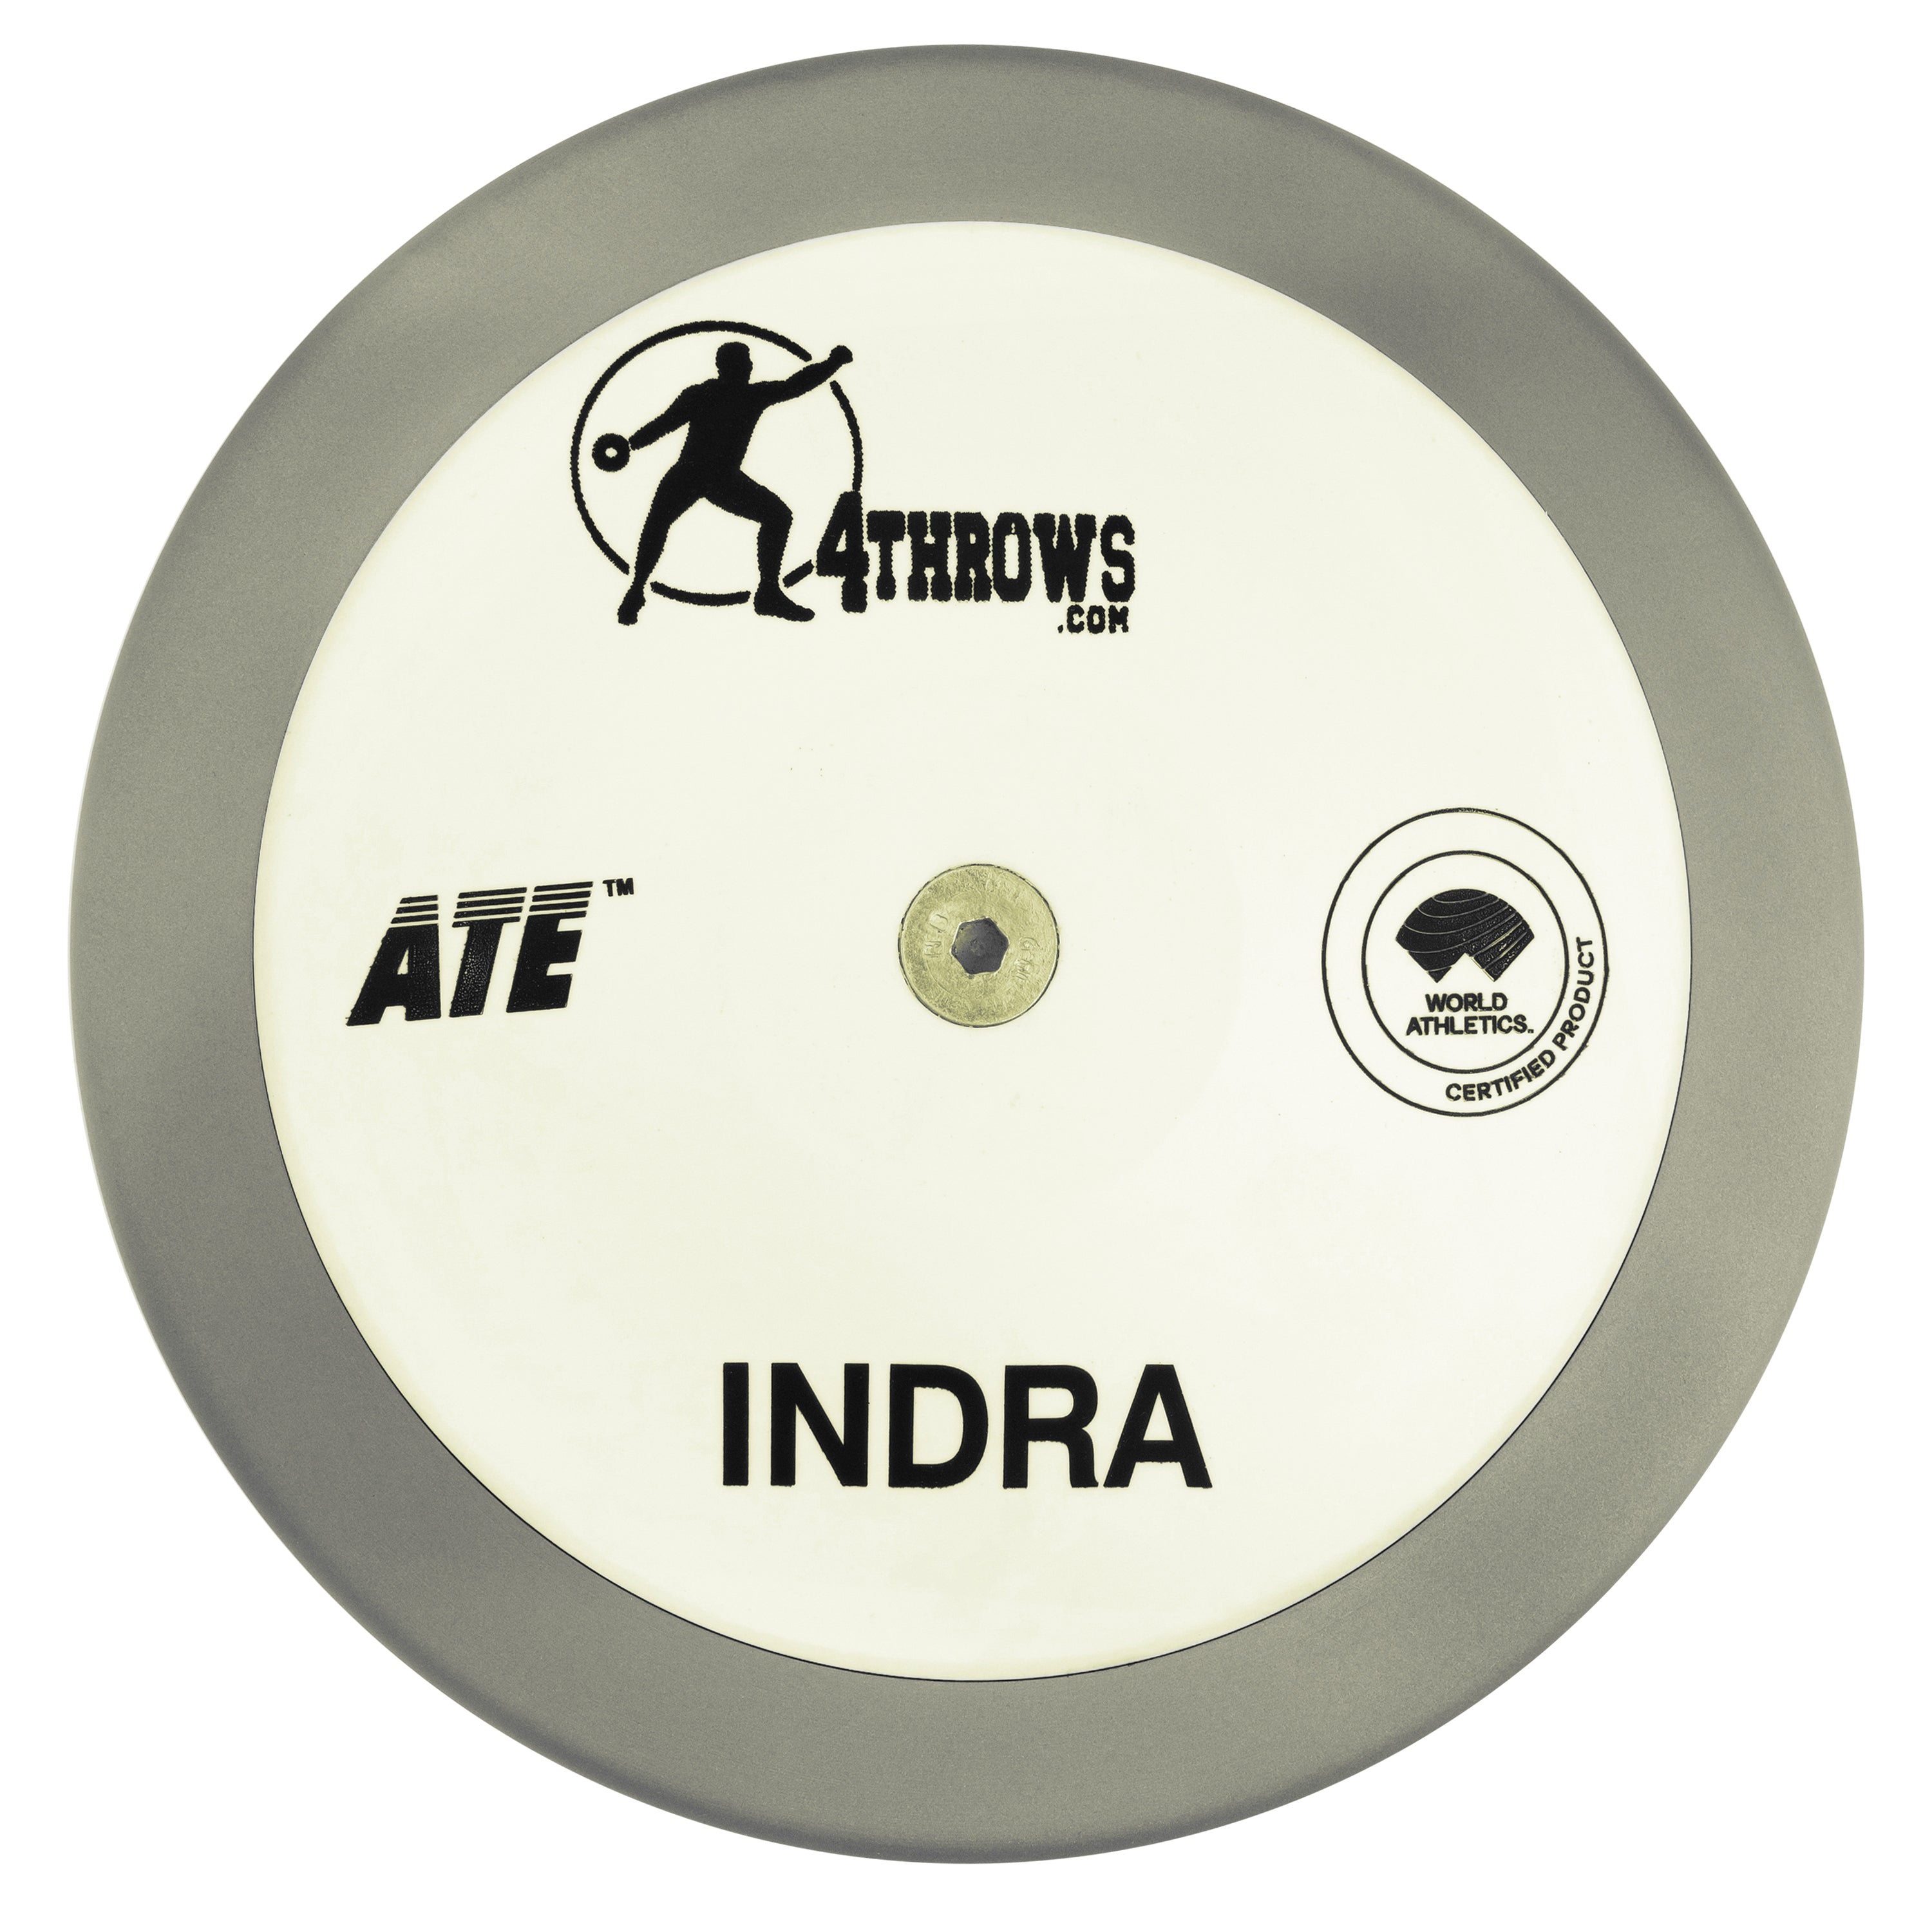 ATE Improved Indra White Stainless Steel Rim Discus - 85%